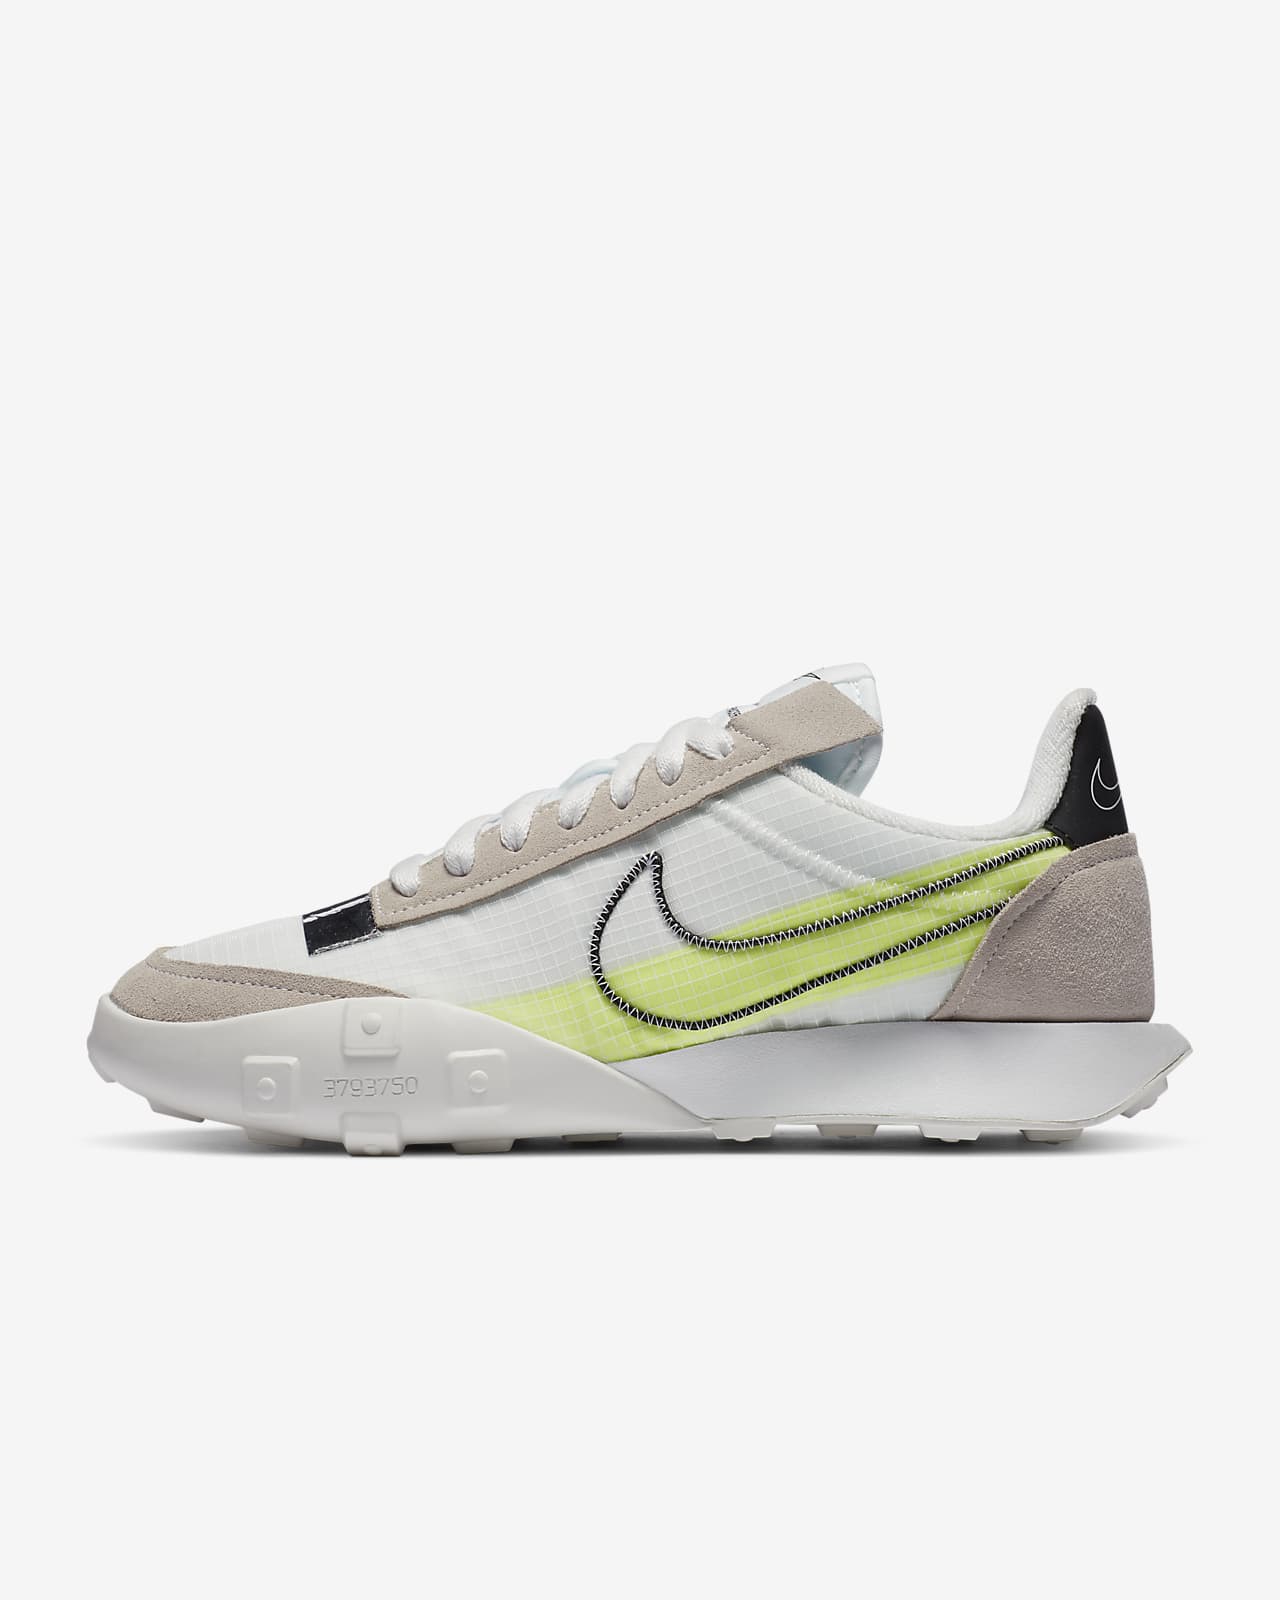 Chaussure Nike Waffle Racer 2X pour 